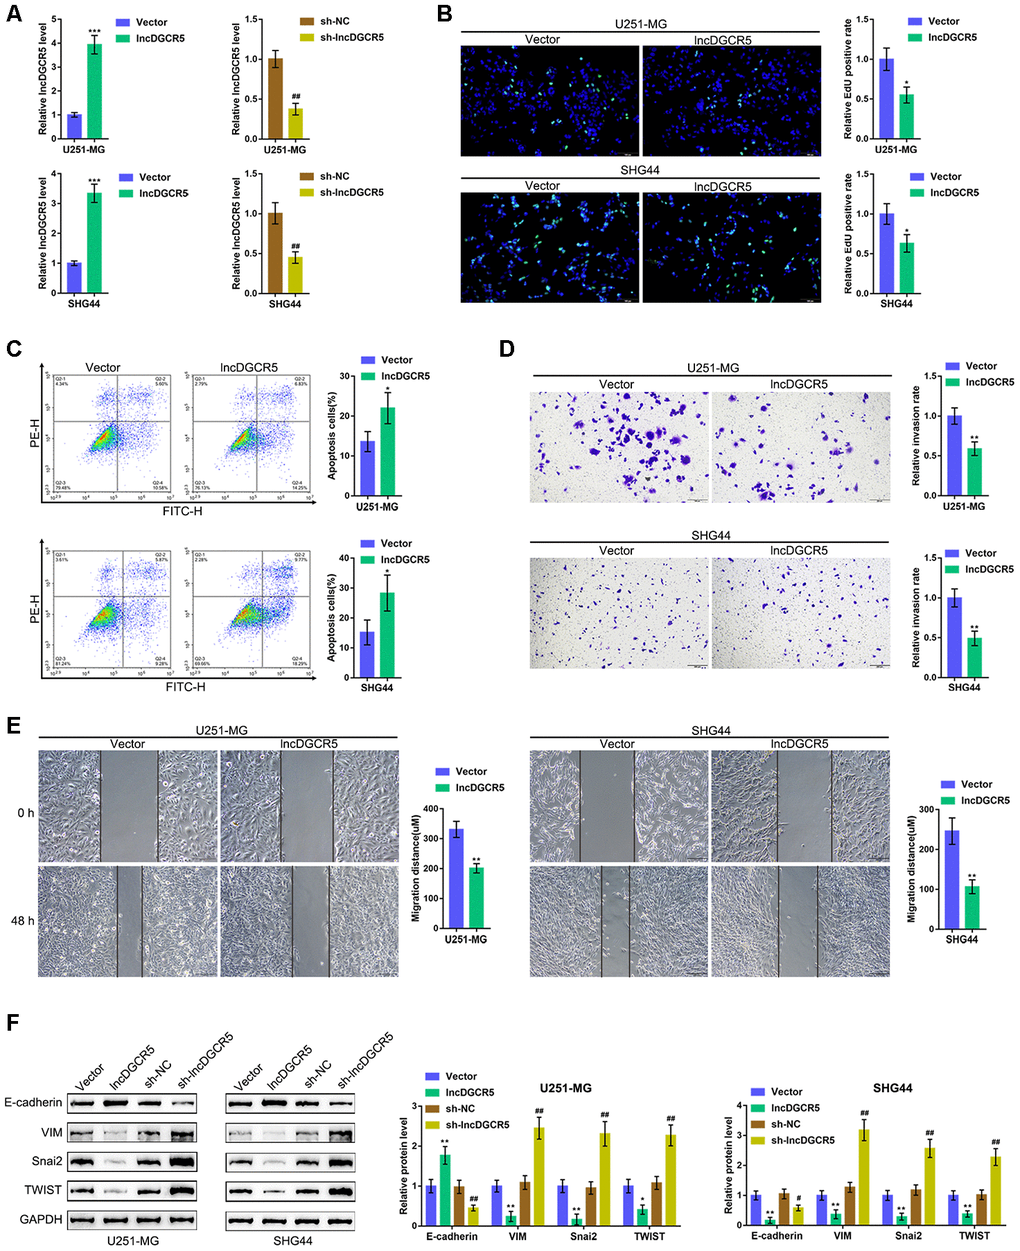 Effects of lncRNA DGCR5 overexpression on glioma cells. (A) LncRNA DGCR5 overexpression or silencing was generated in U251-MG and SHG44 cells by transfection of lncRNA DGCR5-overexpressing vector (lncDGCR5) or small hairpin RNA (sh-DGCR5), as confirmed by real-time PCR. Next, DNA synthesis capacity was determined by EdU assay (B); cell apoptosis was determined by Flow cytometry assay (C); cell invasive capacity was determined by Transwell assay (D); cell migratory capacity was determined by Wound healing assay (E). (F) U251-MG and SHG44 cells were transfected with lncDGCR5 or sh-DGCR5 and the protein levels of E-cadherin, VIM, Snai2, and TWIST were determined by immunoblotting. *PPPP